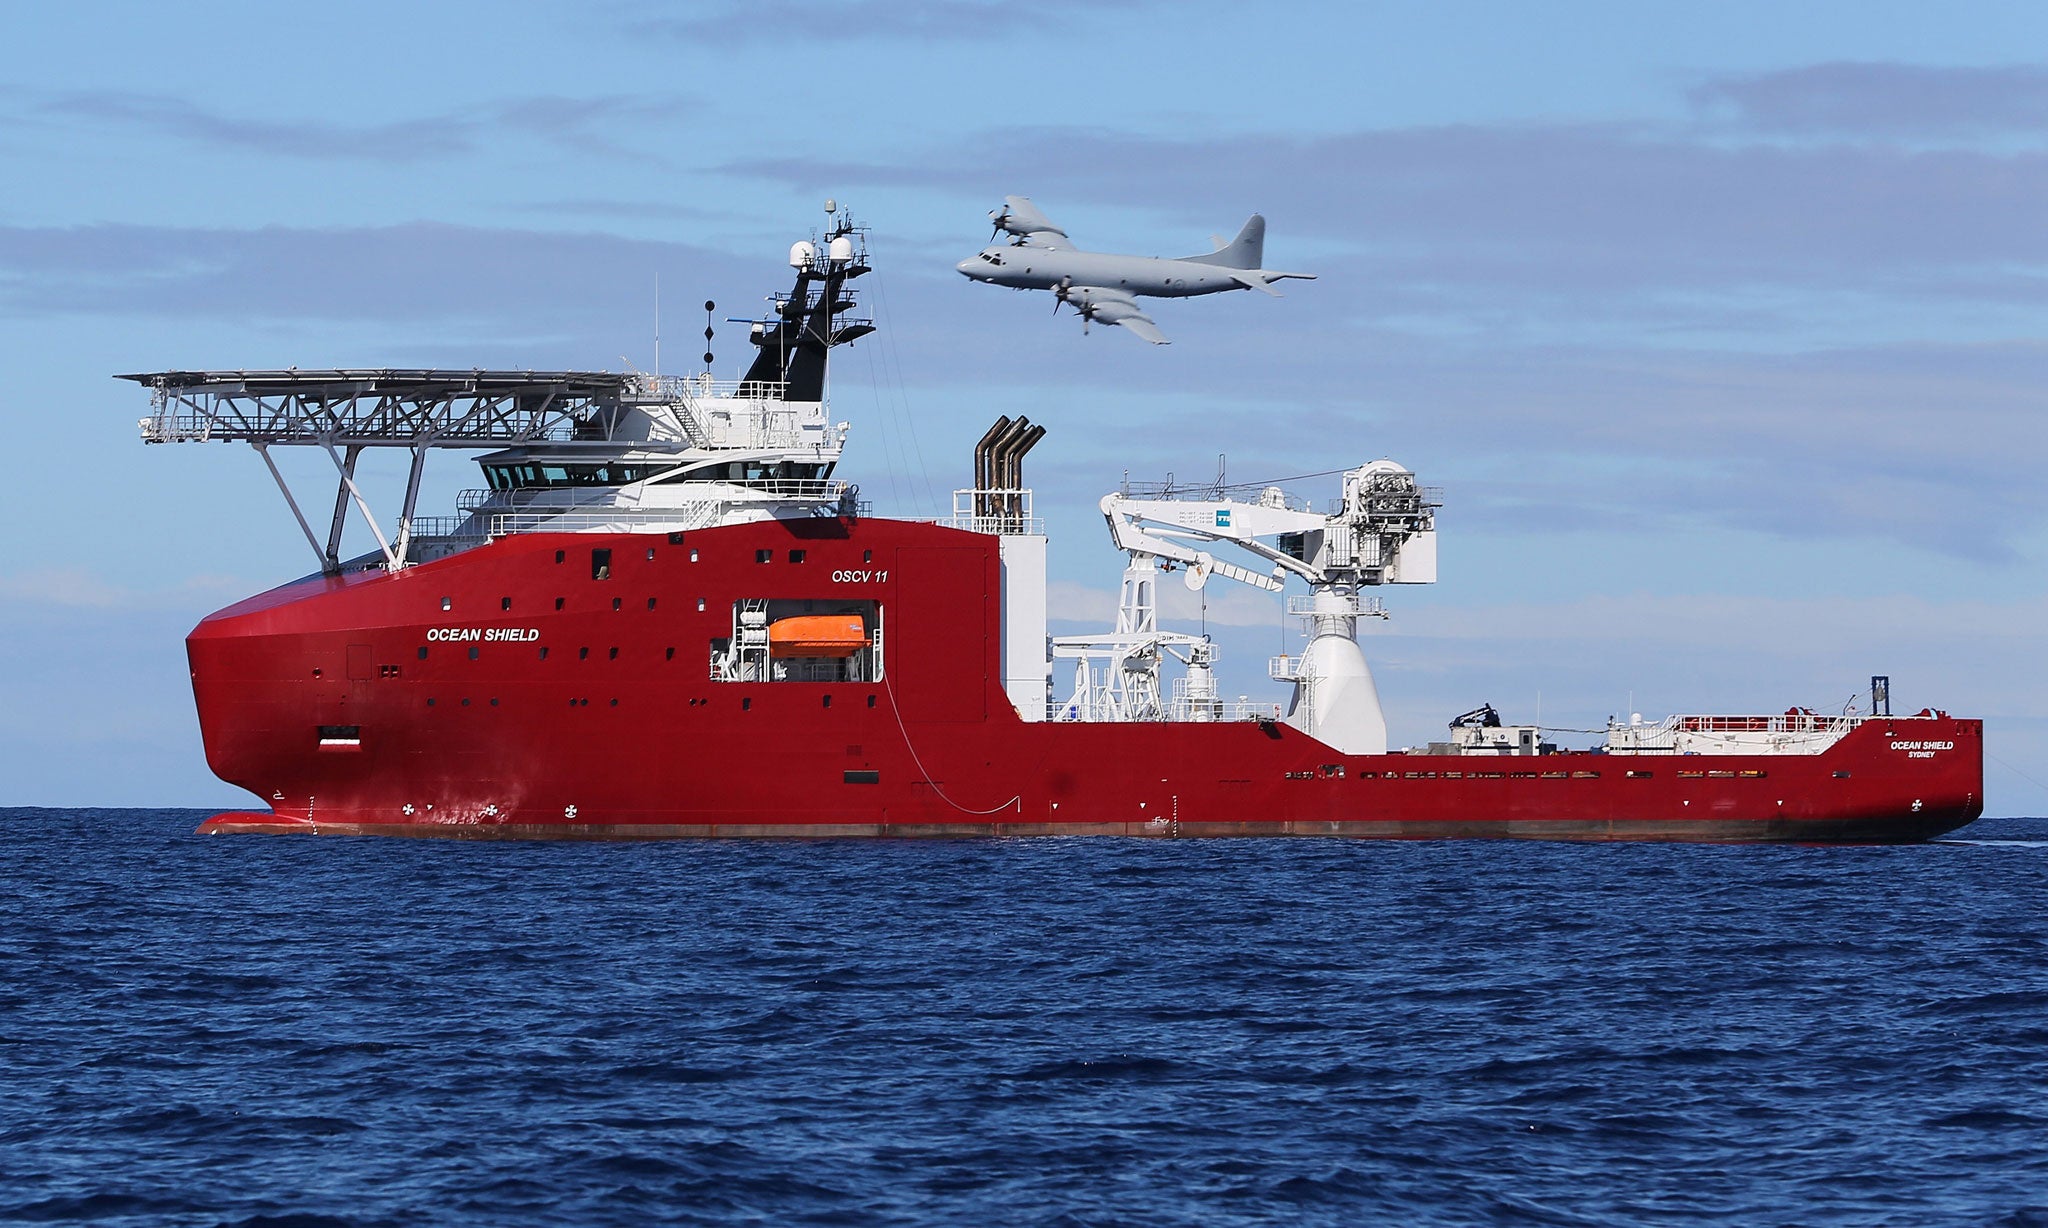 A Royal Australian Air Force AP-3C Orion flying past Australian Defence Vessel Ocean Shield, released by the search authorities on 9 April